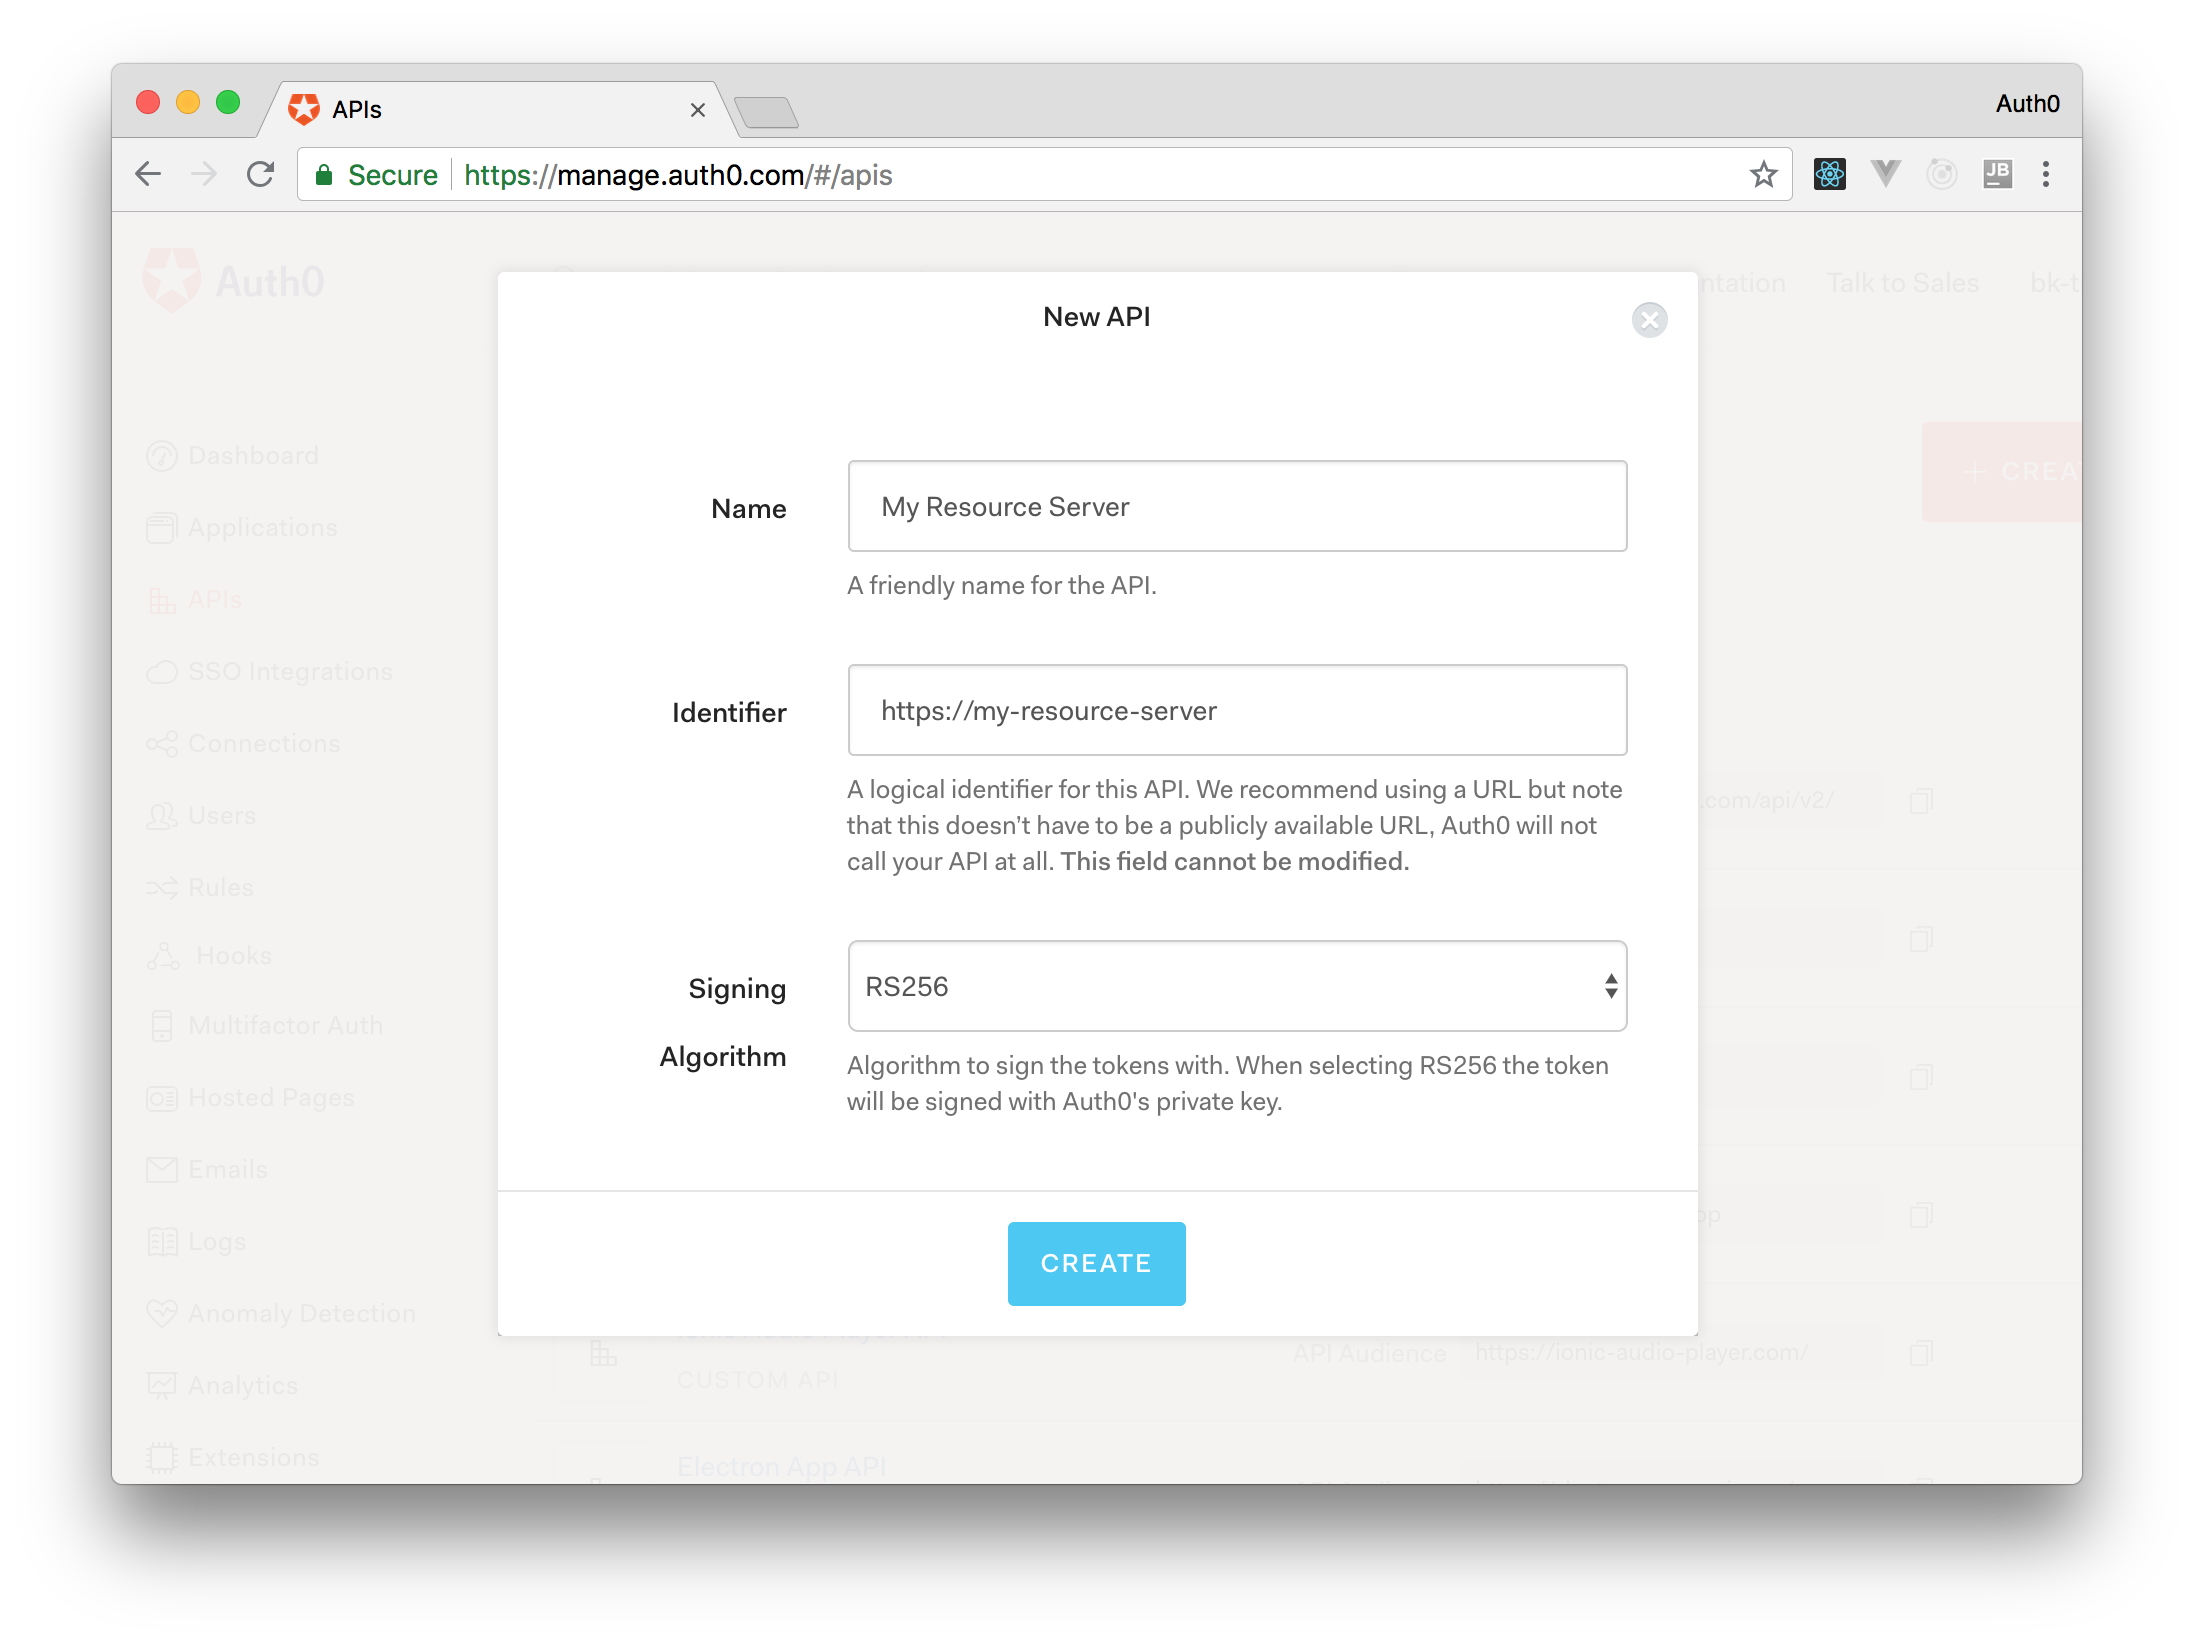 Creating an Auth0 API for your Resource Server.